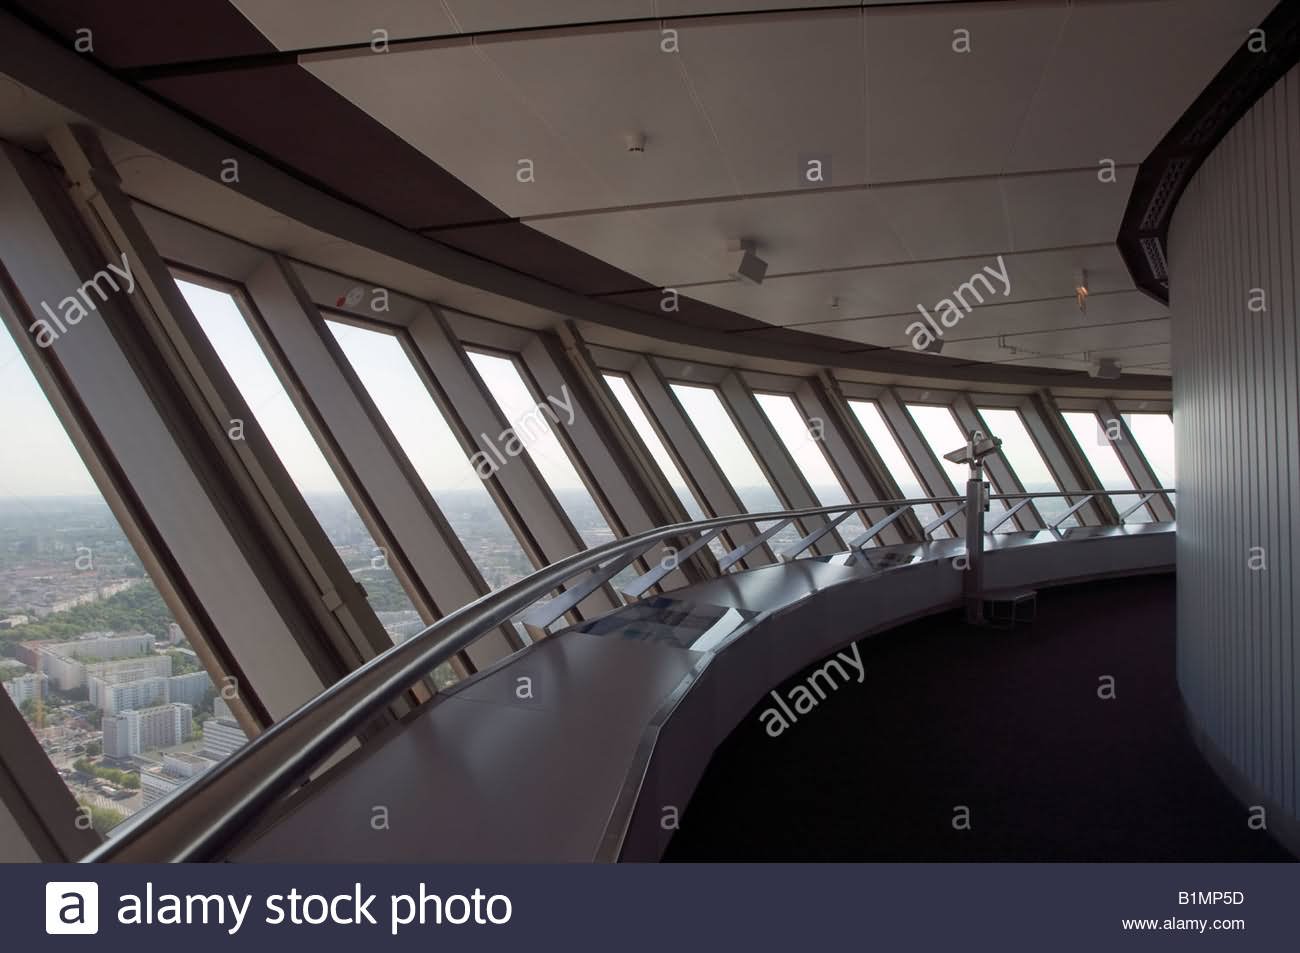 Interior View Of The Terrace Of Fernsehturm Tower In Berlin, Germany